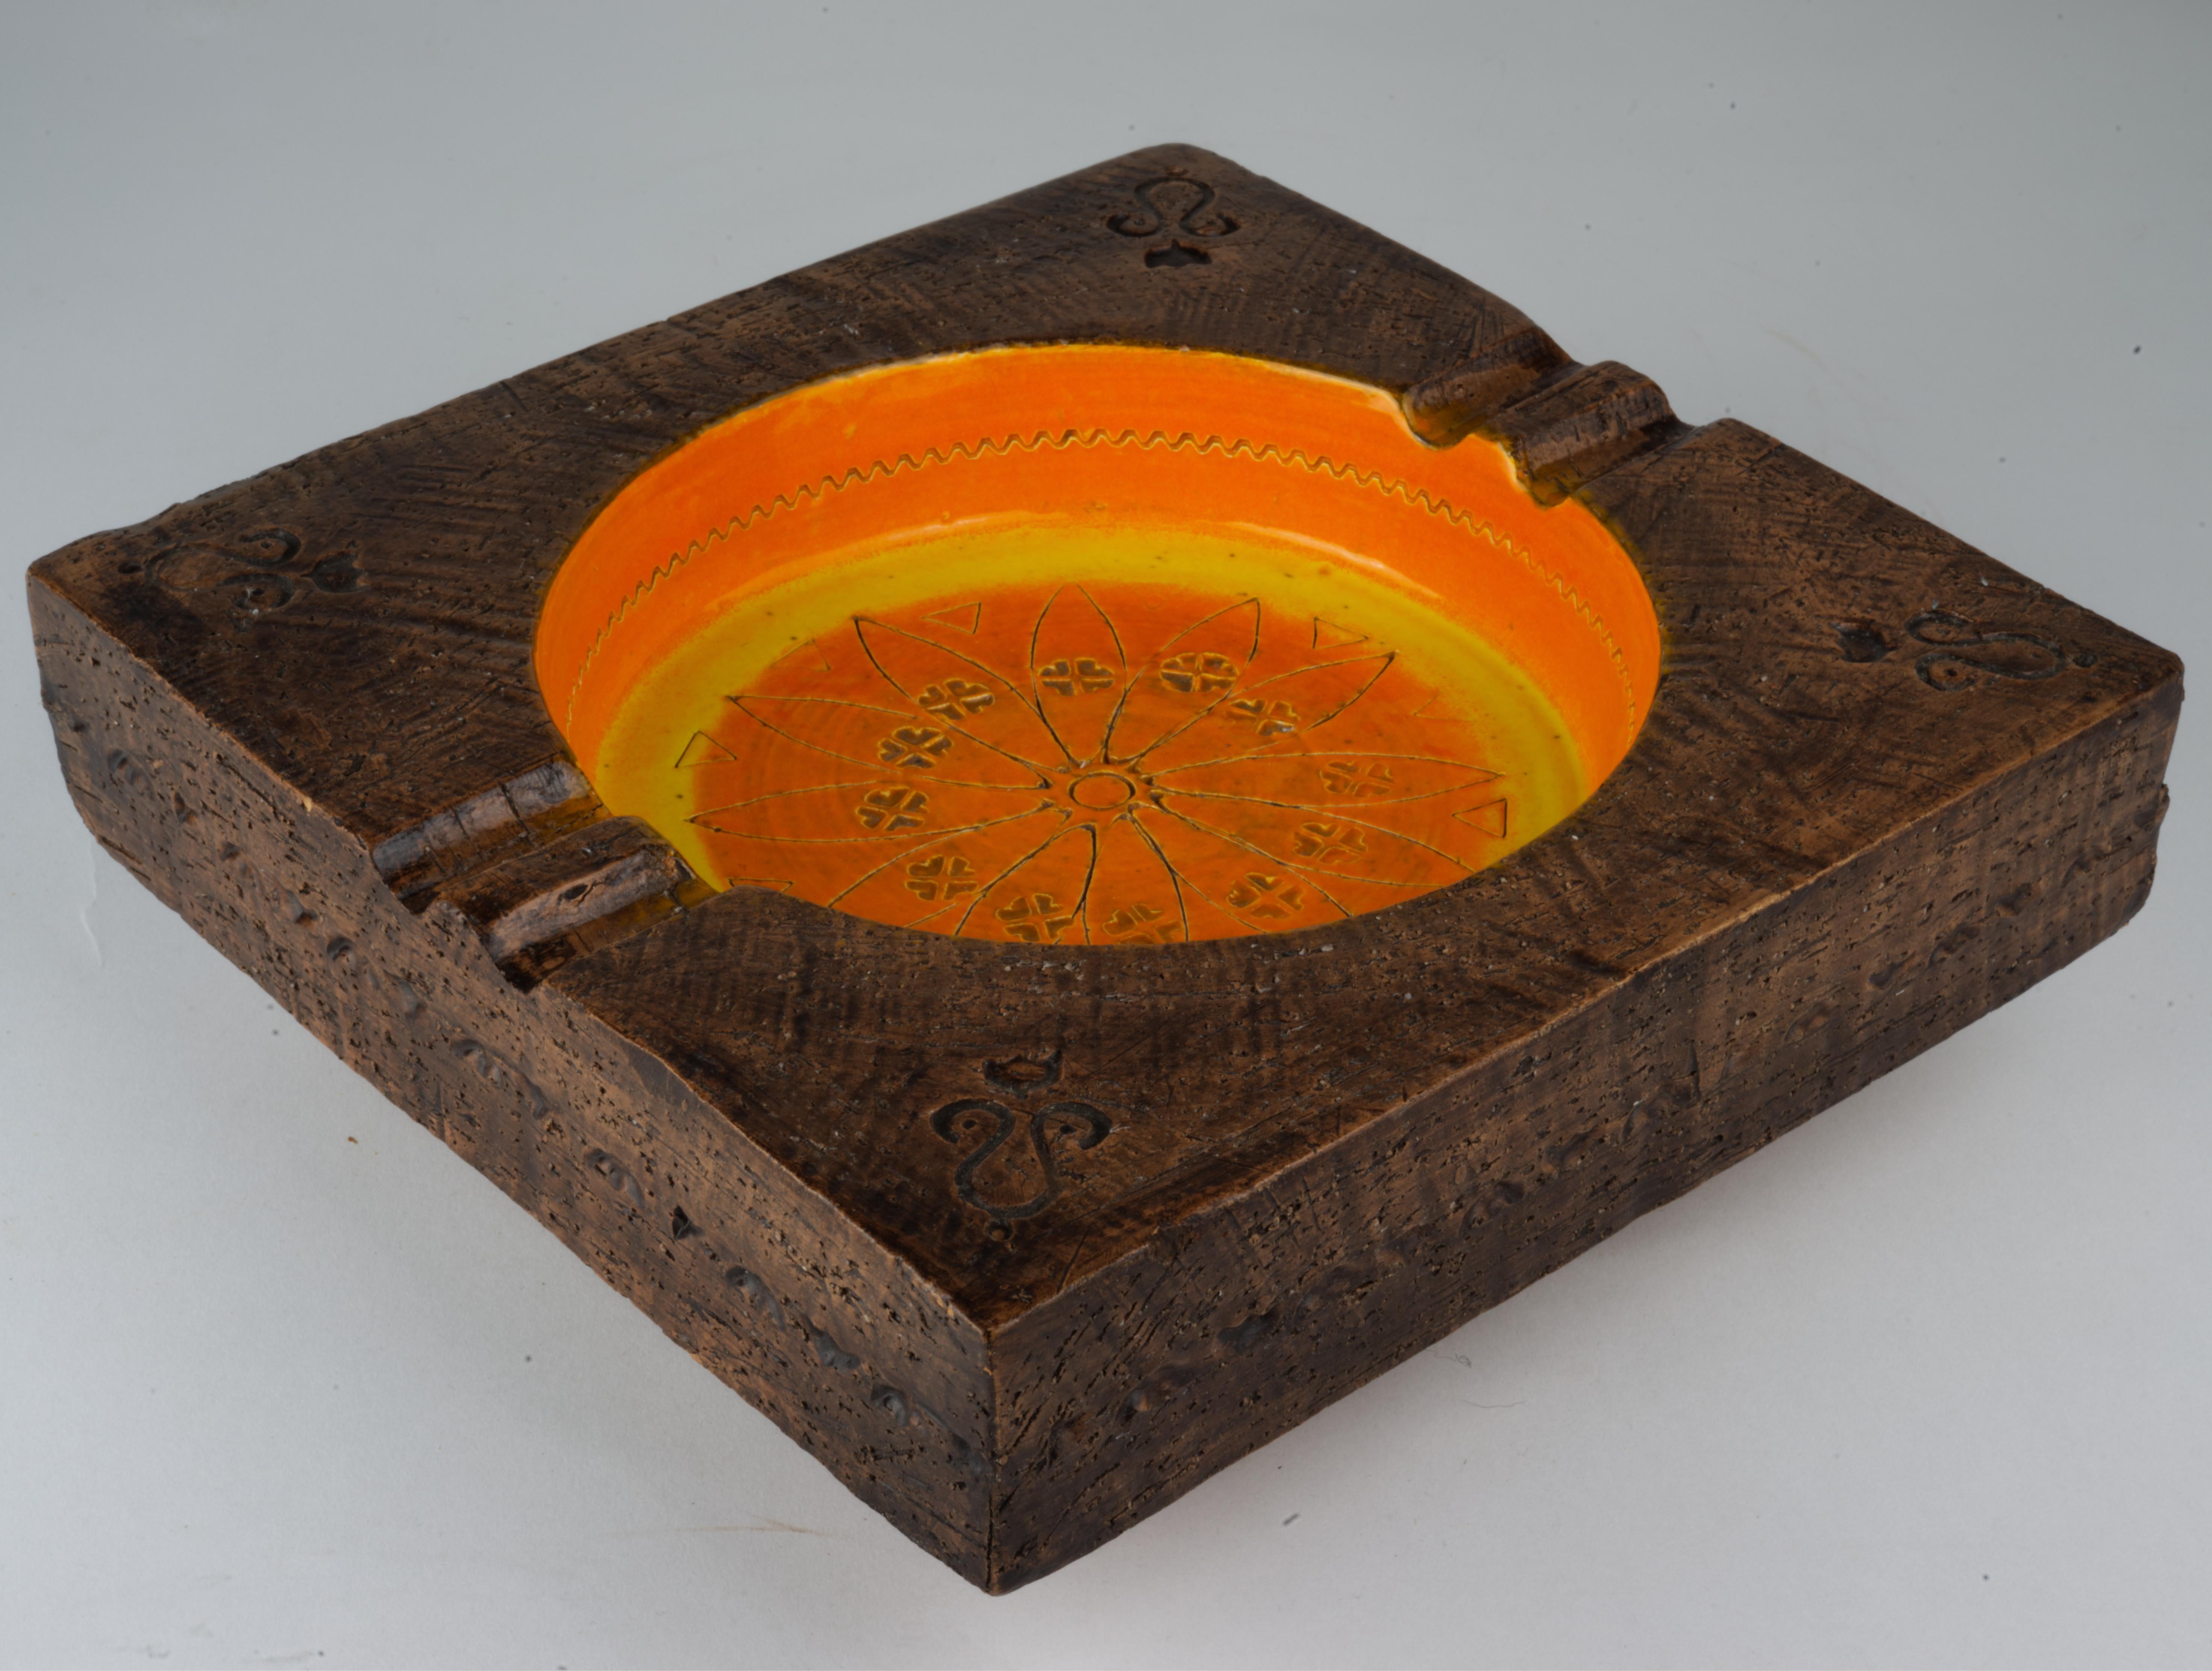  Mid-Century Modern catch all or ashtray was made by Bitossi for Rosenthal Netter. The square semi-matte brown outer rim encloses the concave circle in the middle that is decorated with bright orange and yellow glaze with incised accents. The piece